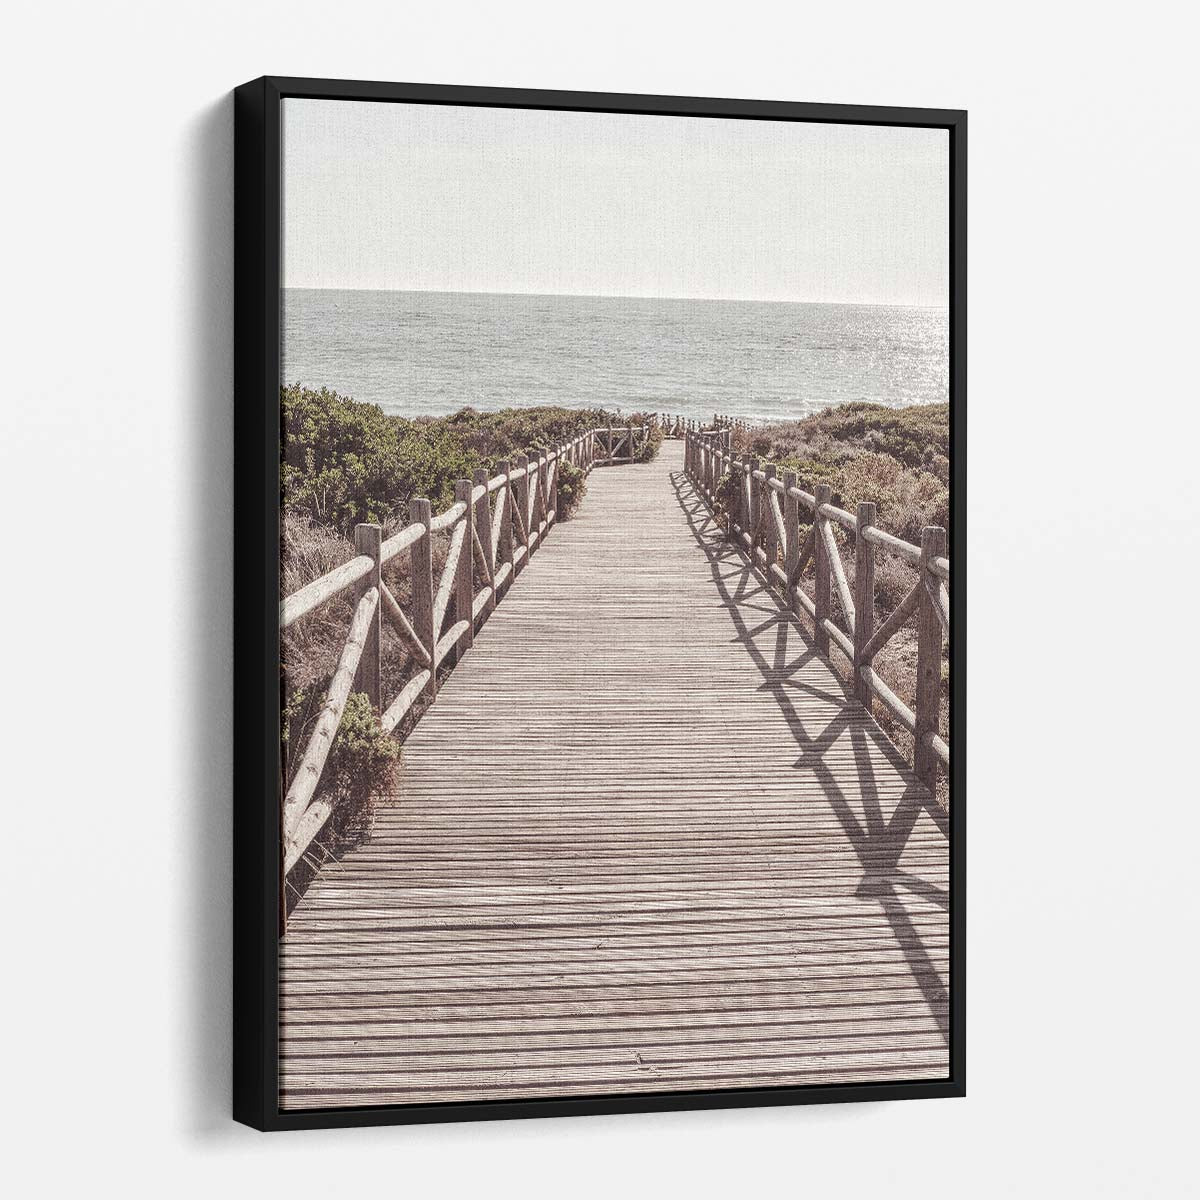 Coastal Landscape Photography Wooden Boardwalk Sea Perspective Artwork by Luxuriance Designs, made in USA